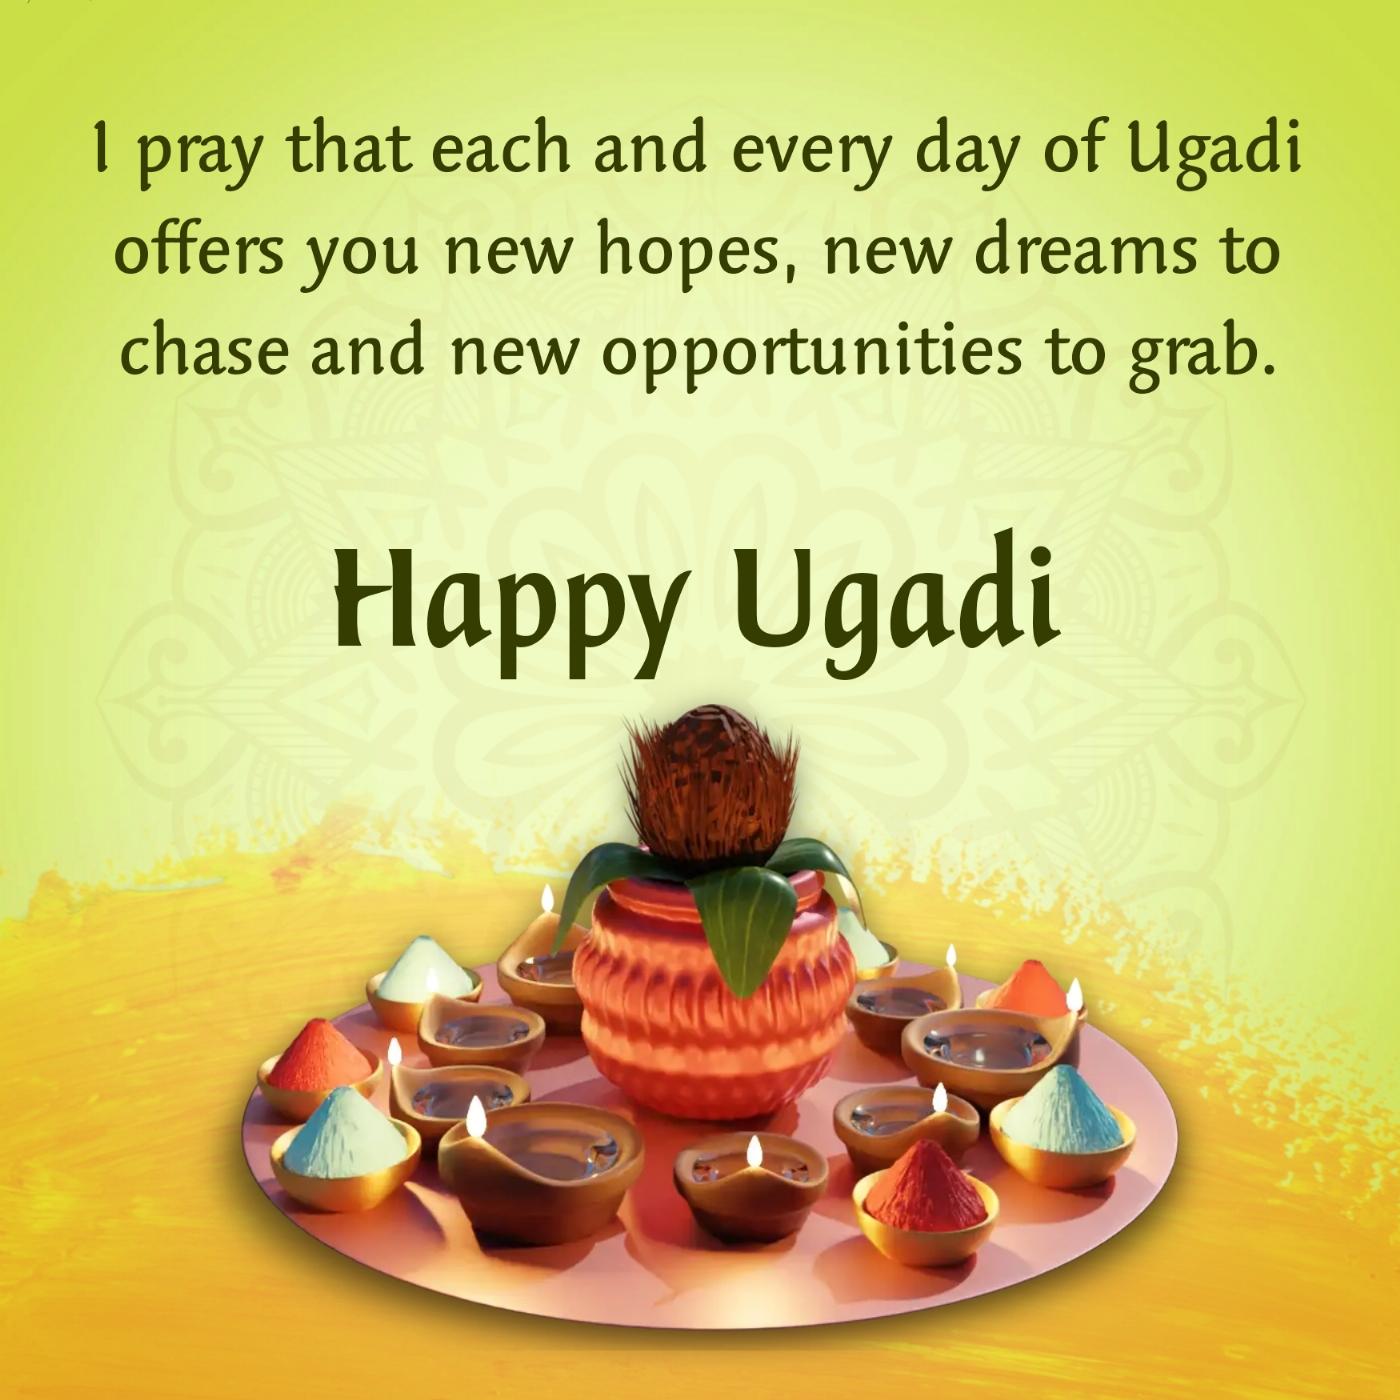 I pray that each and every day of Ugadi offers you new hopes